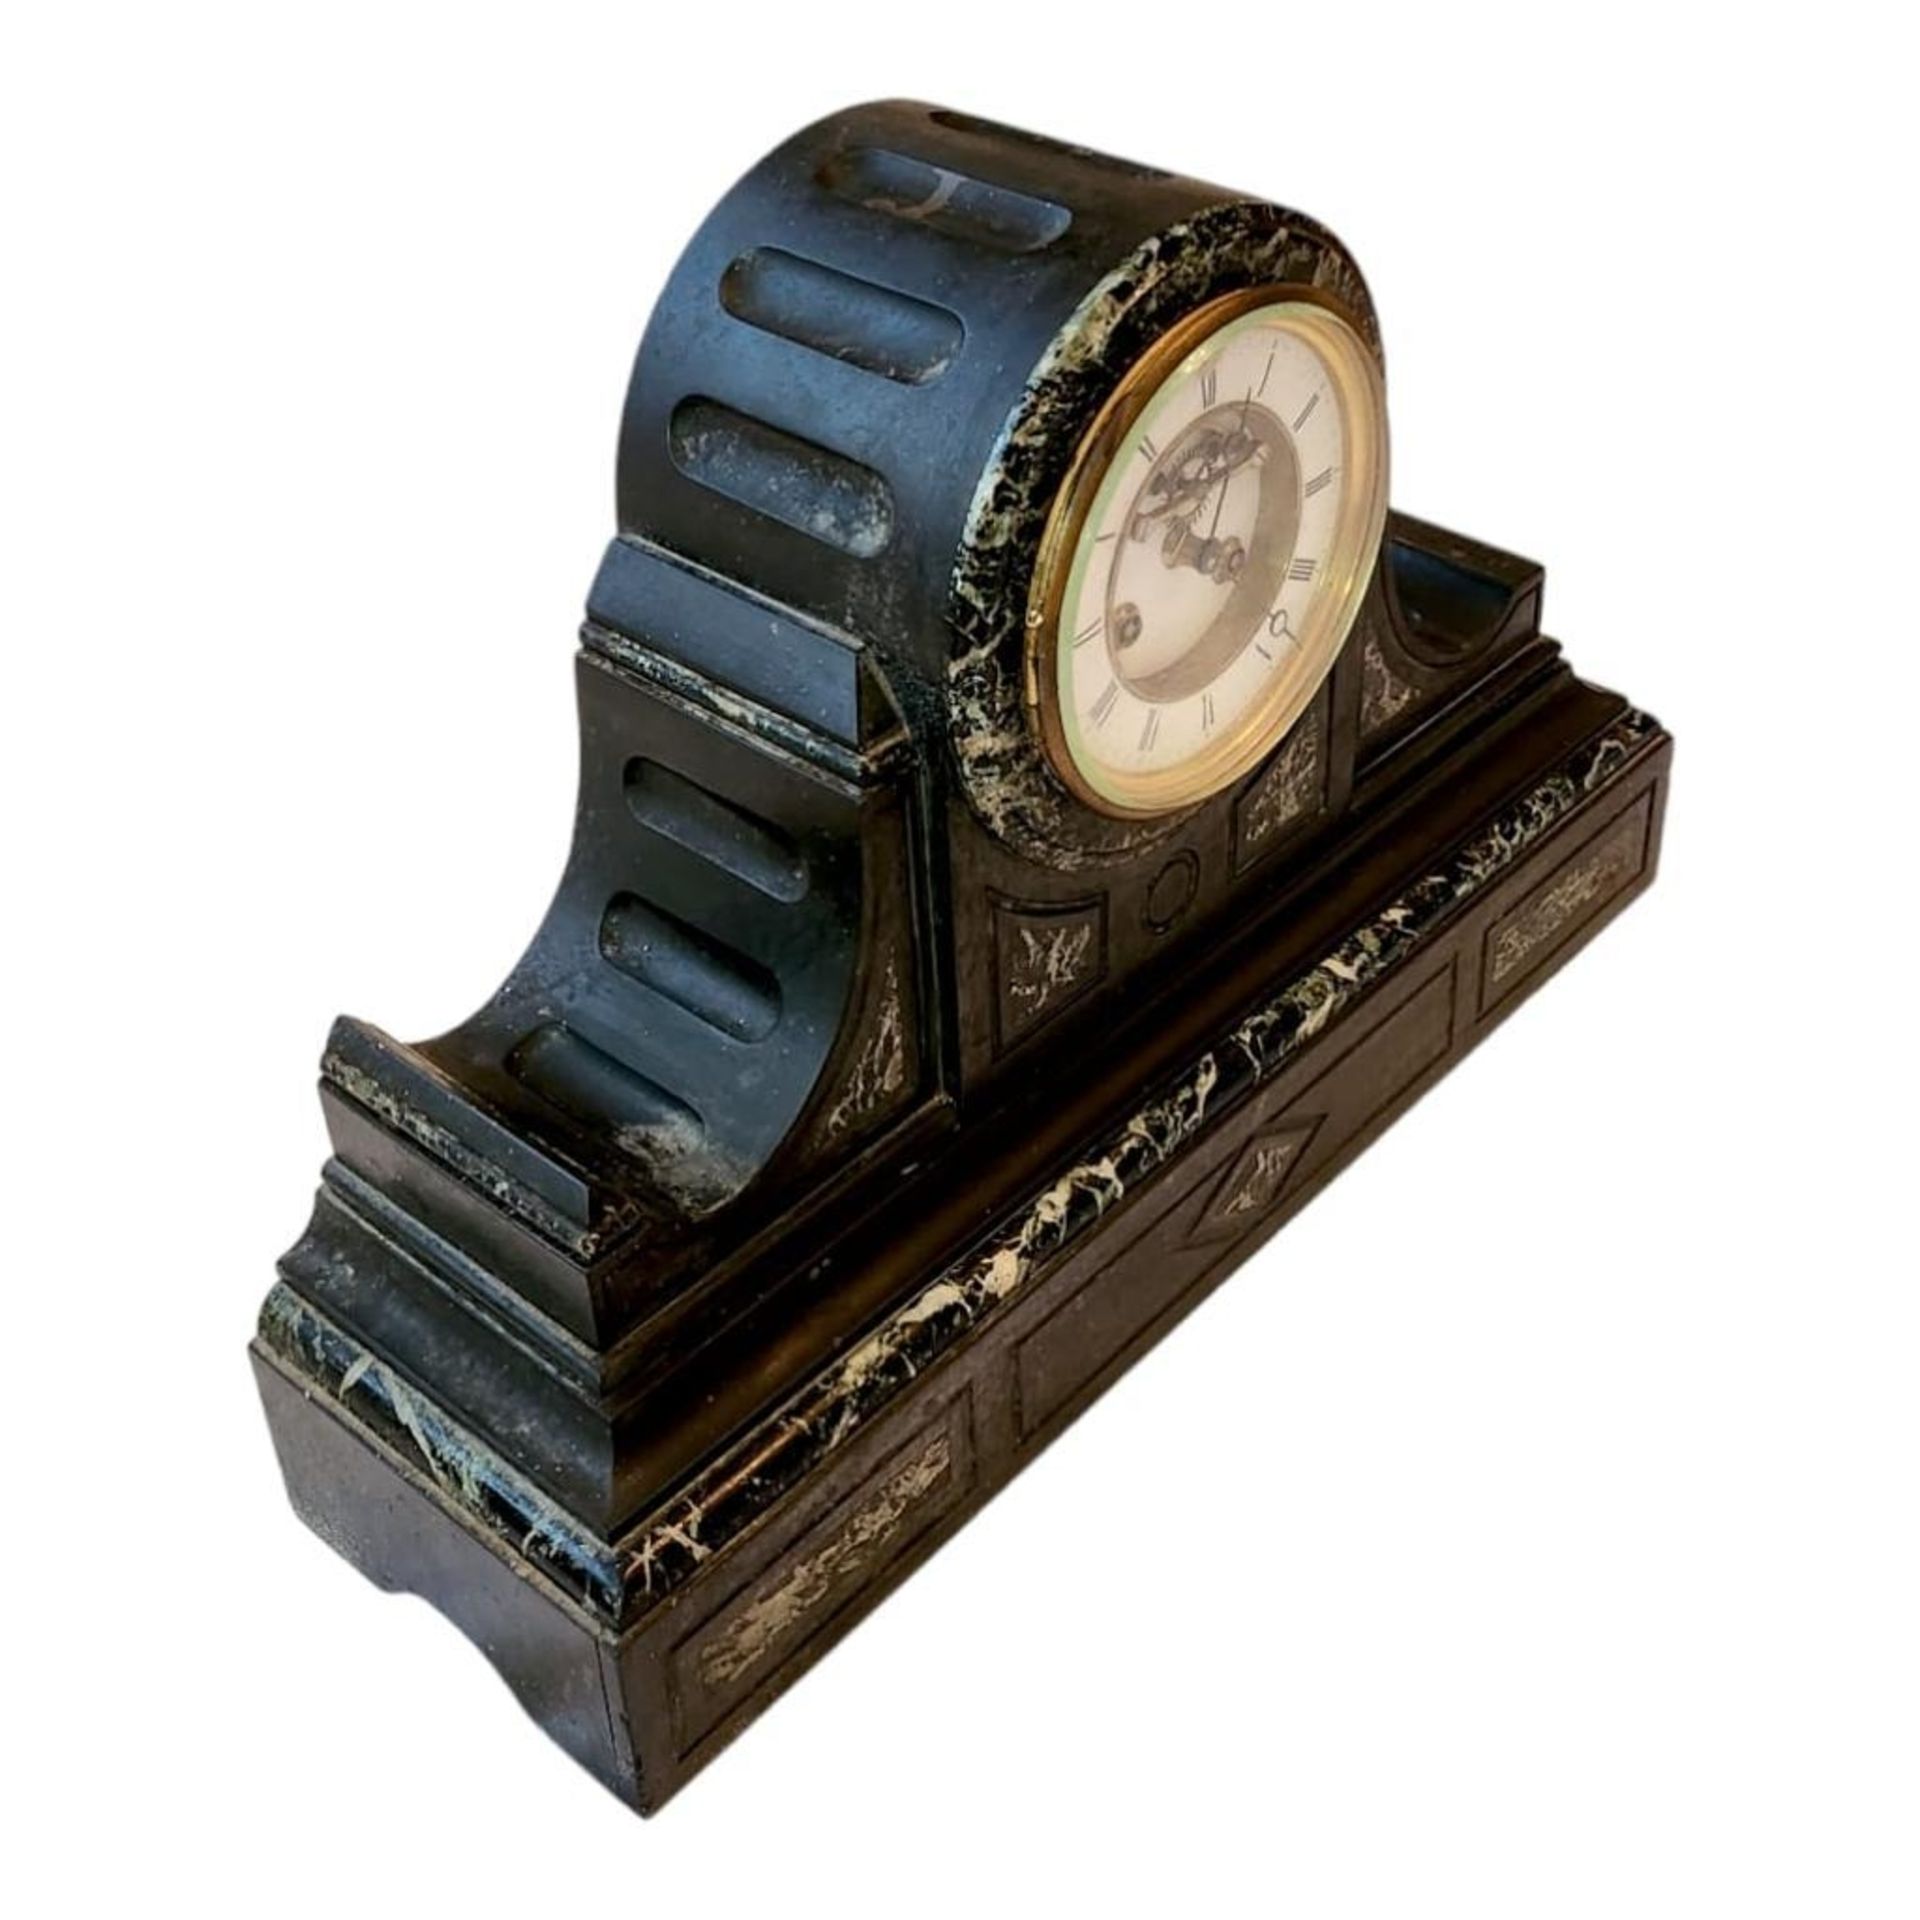 A Victorian Slate Mantel Clock with Eight Day French Bell Strike Movement and Visual Escapement. - Image 4 of 13